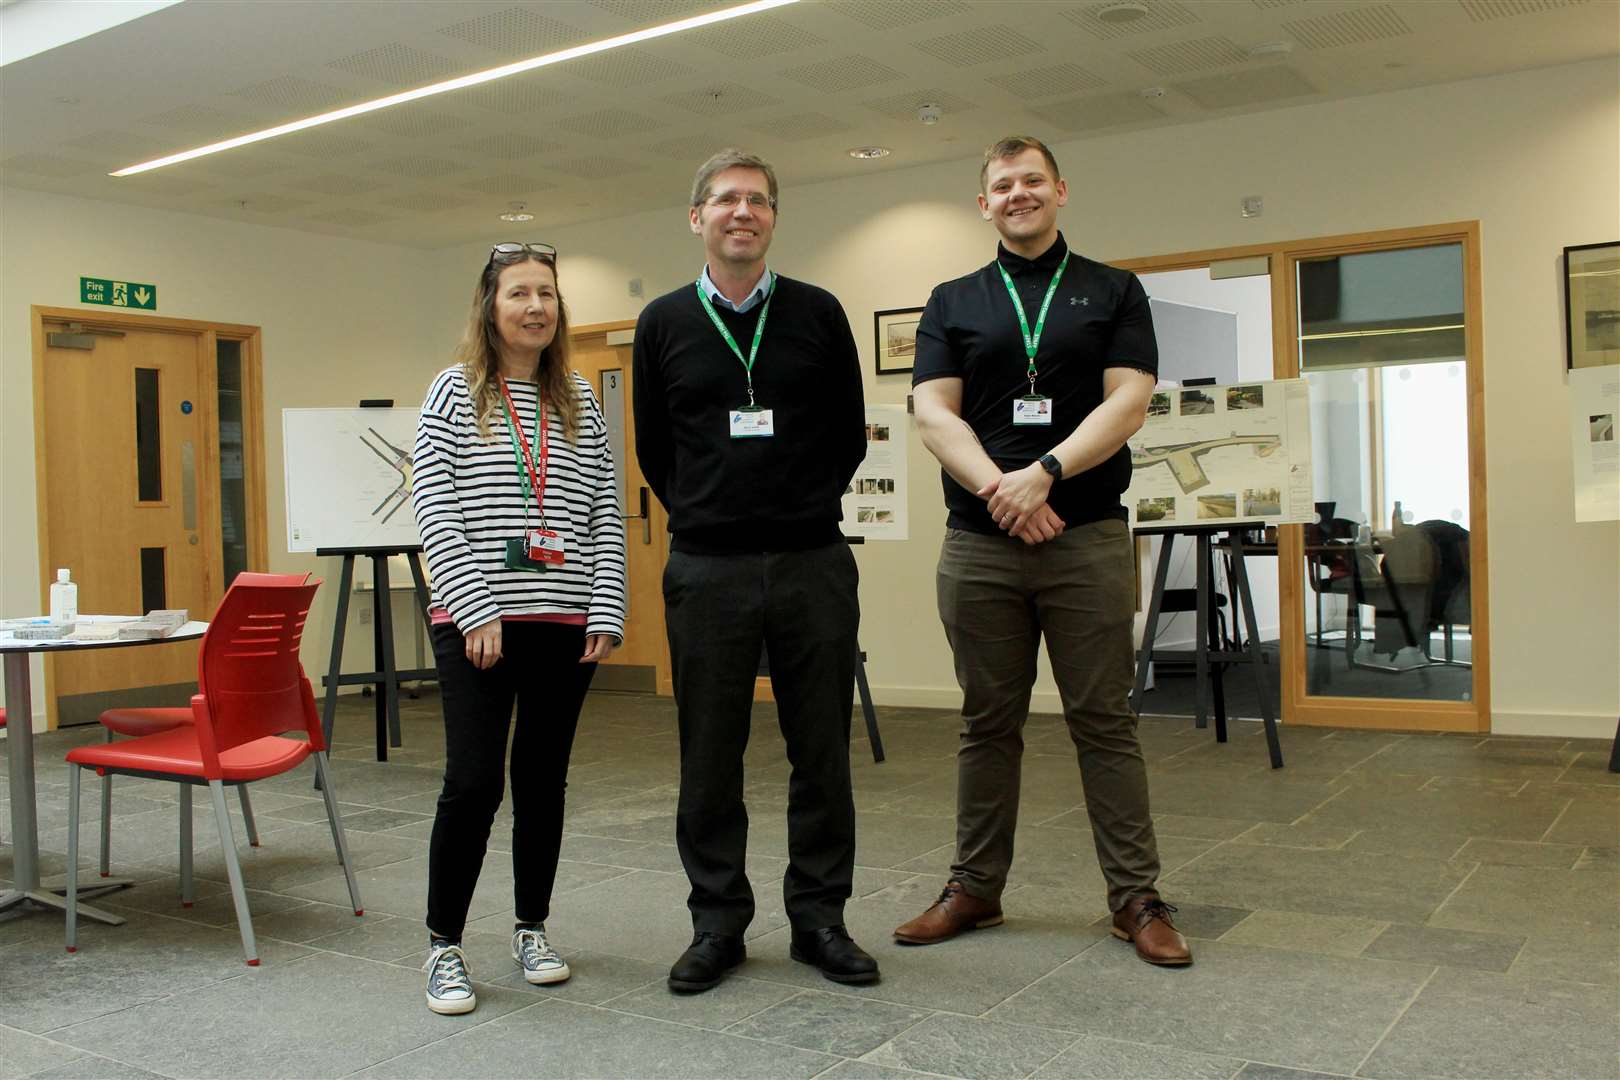 From left: Carolyn Smith, senior technician; Garry Smith, lead officer for infrastructure; and Adam Manson, graduate engineer, at the Highland Council event in Caithness House. Picture: Alan Hendry